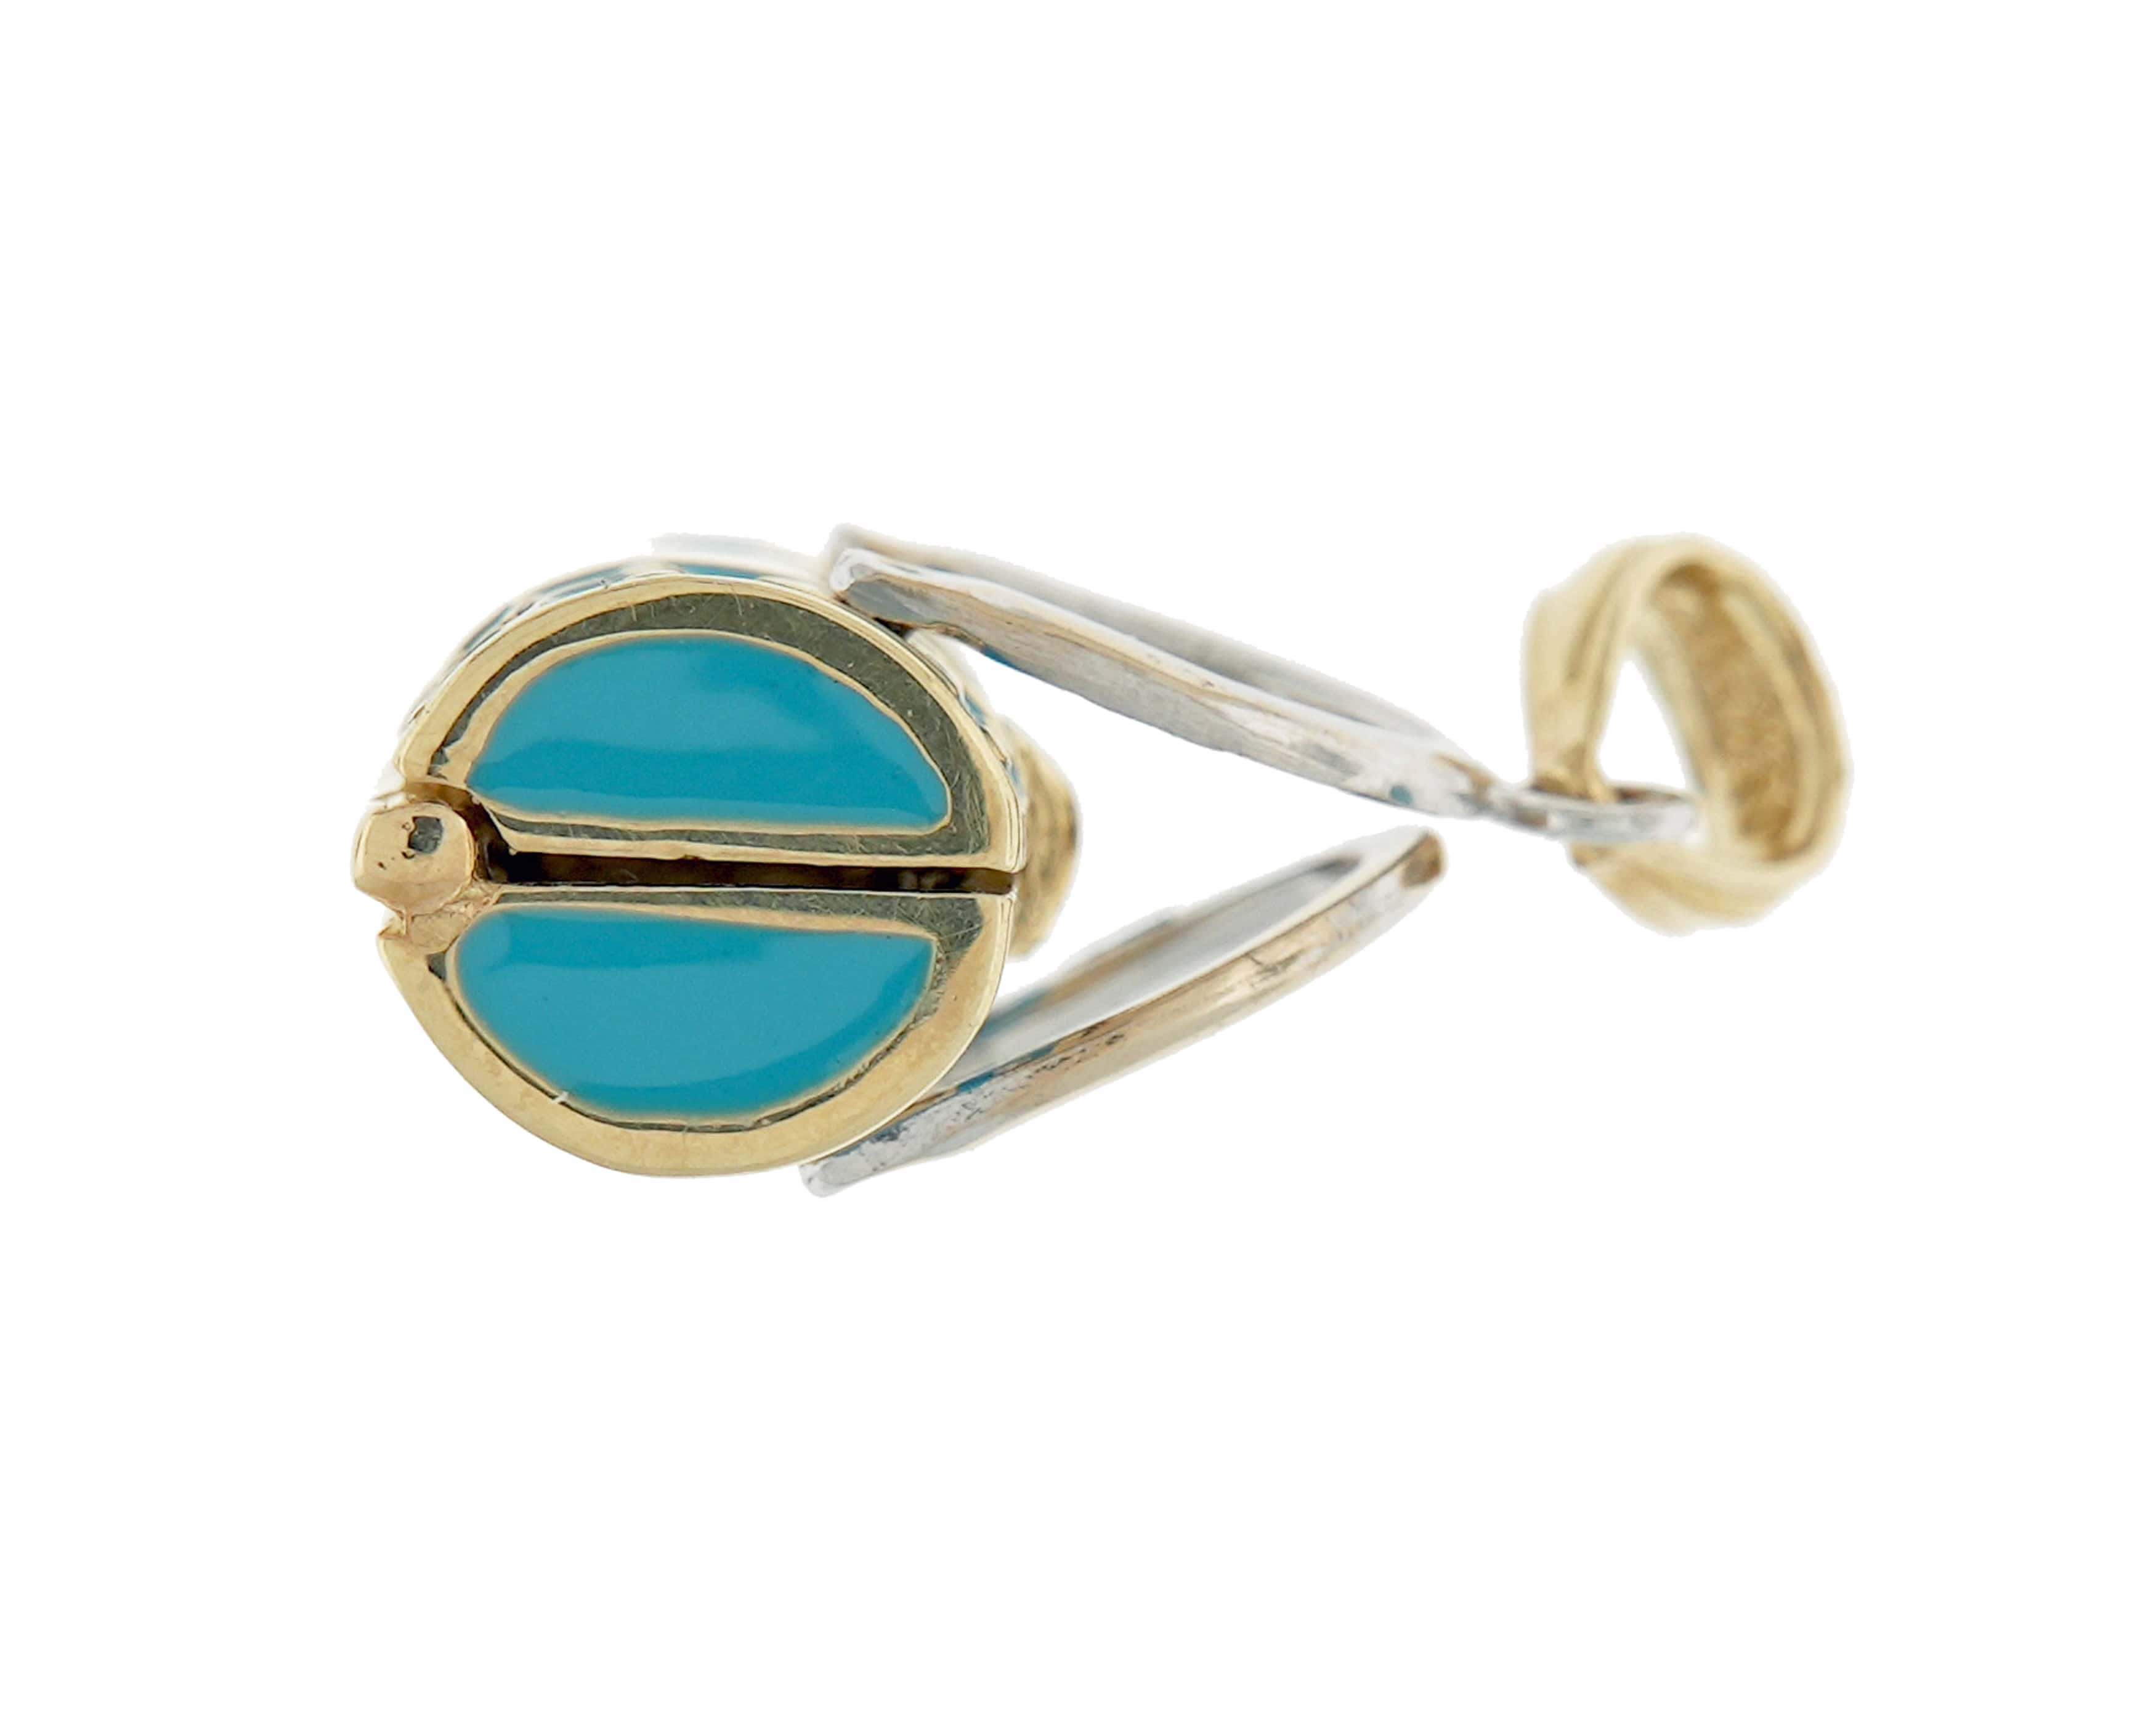 14K Yellow Gold & Rhodium 3-D Teal Enameled Opens Duffle/Purse Charm